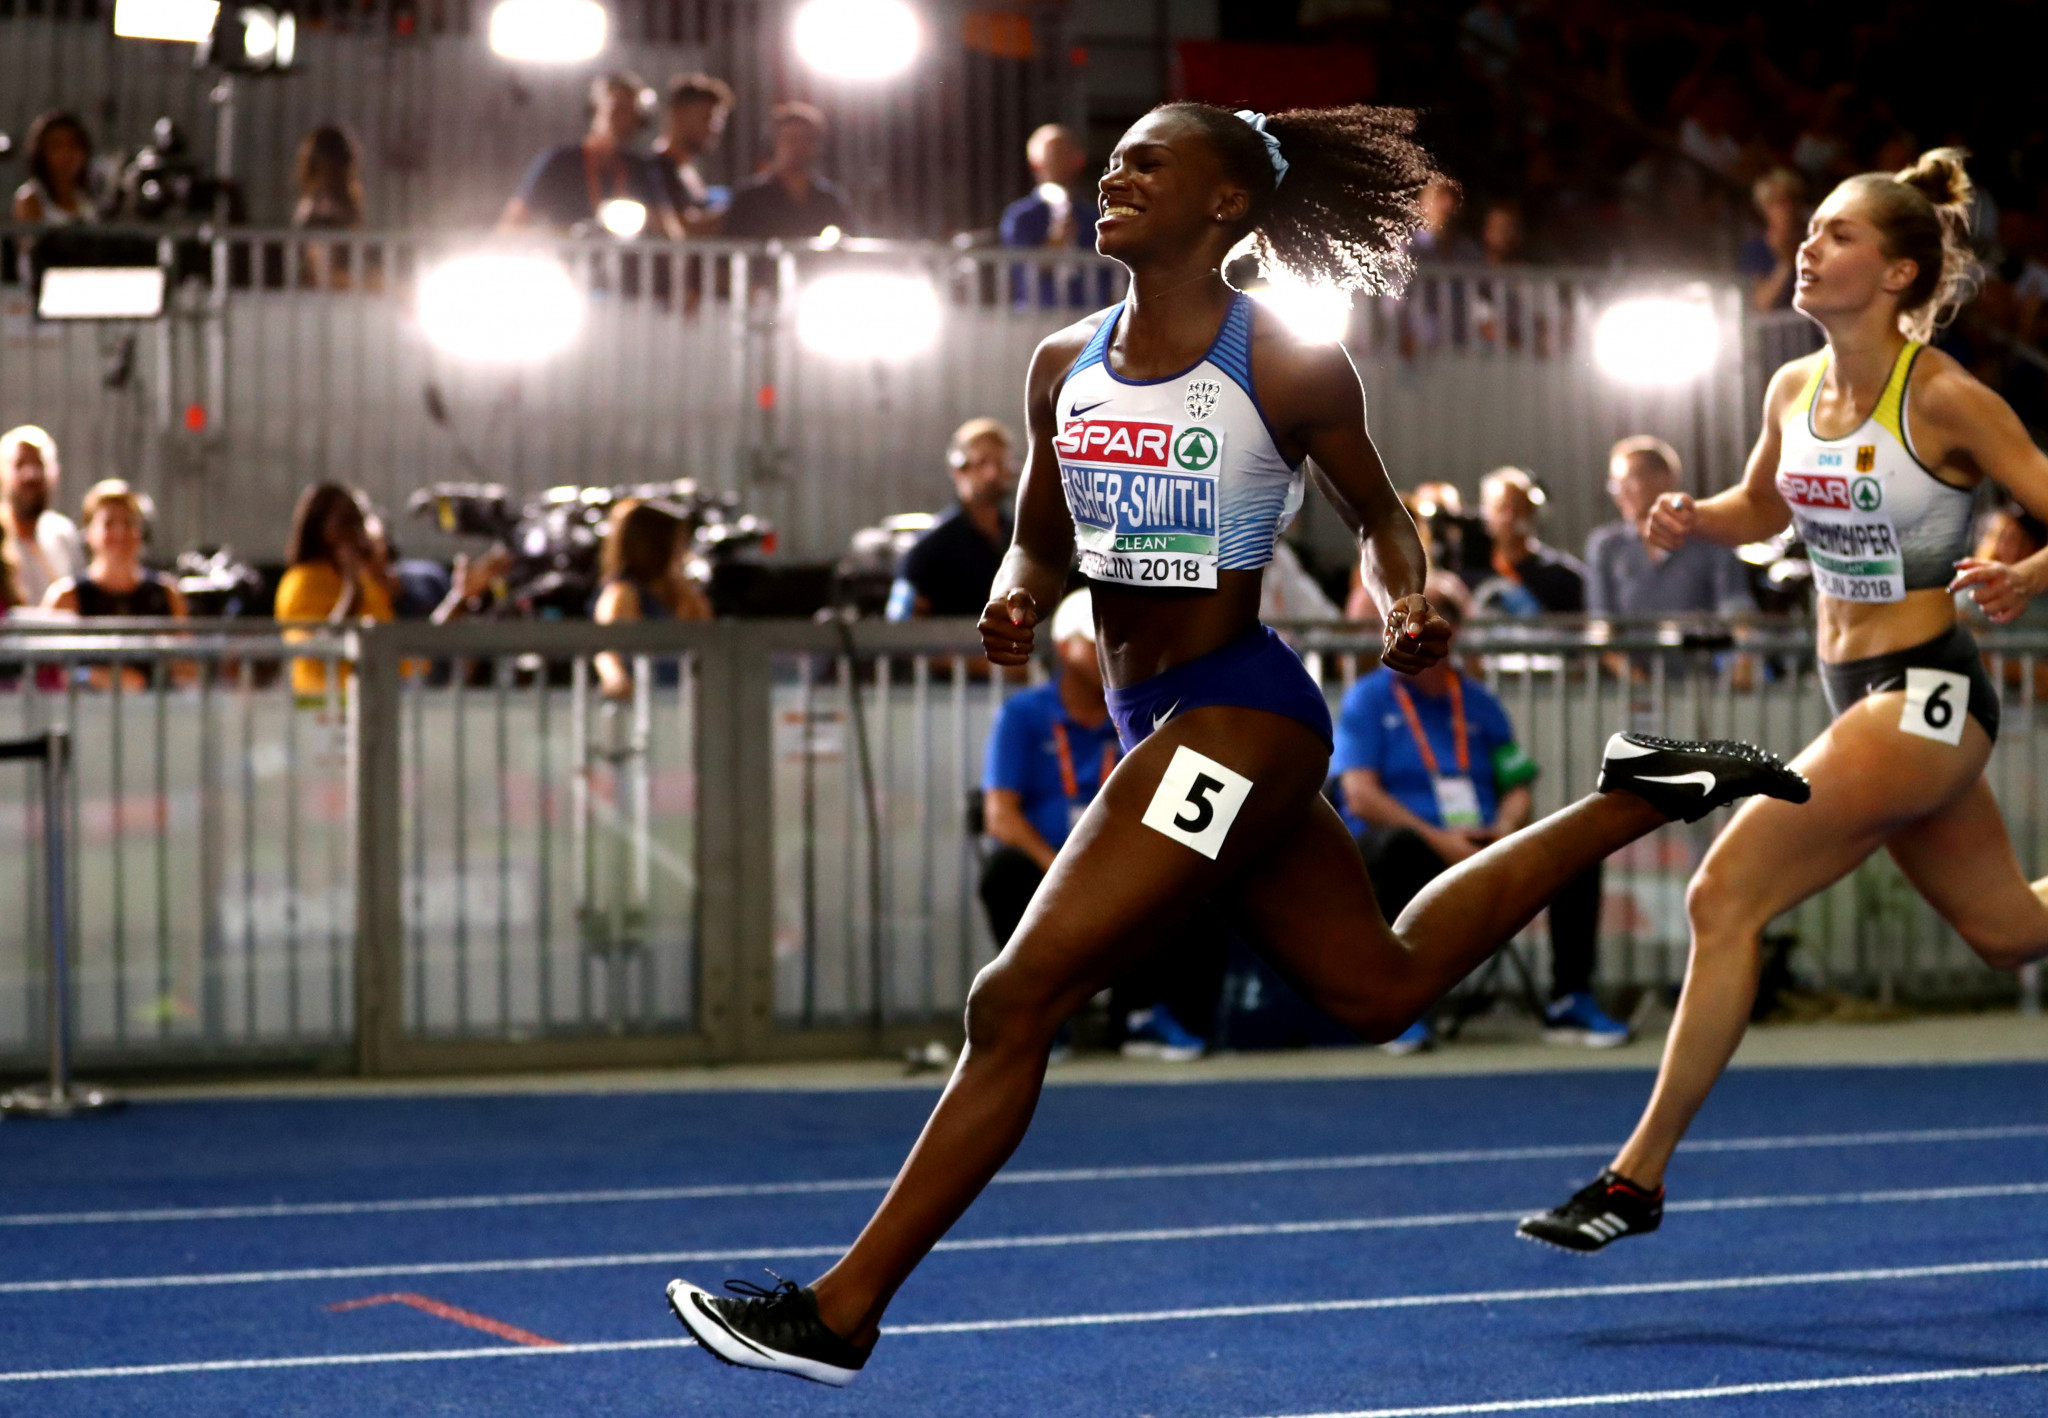 Over in Berlin, Dina Asher-Smith won the first of two golds for Great Britain in the 100m, corssing the line in a national record of 10.85secs ©Getty Images